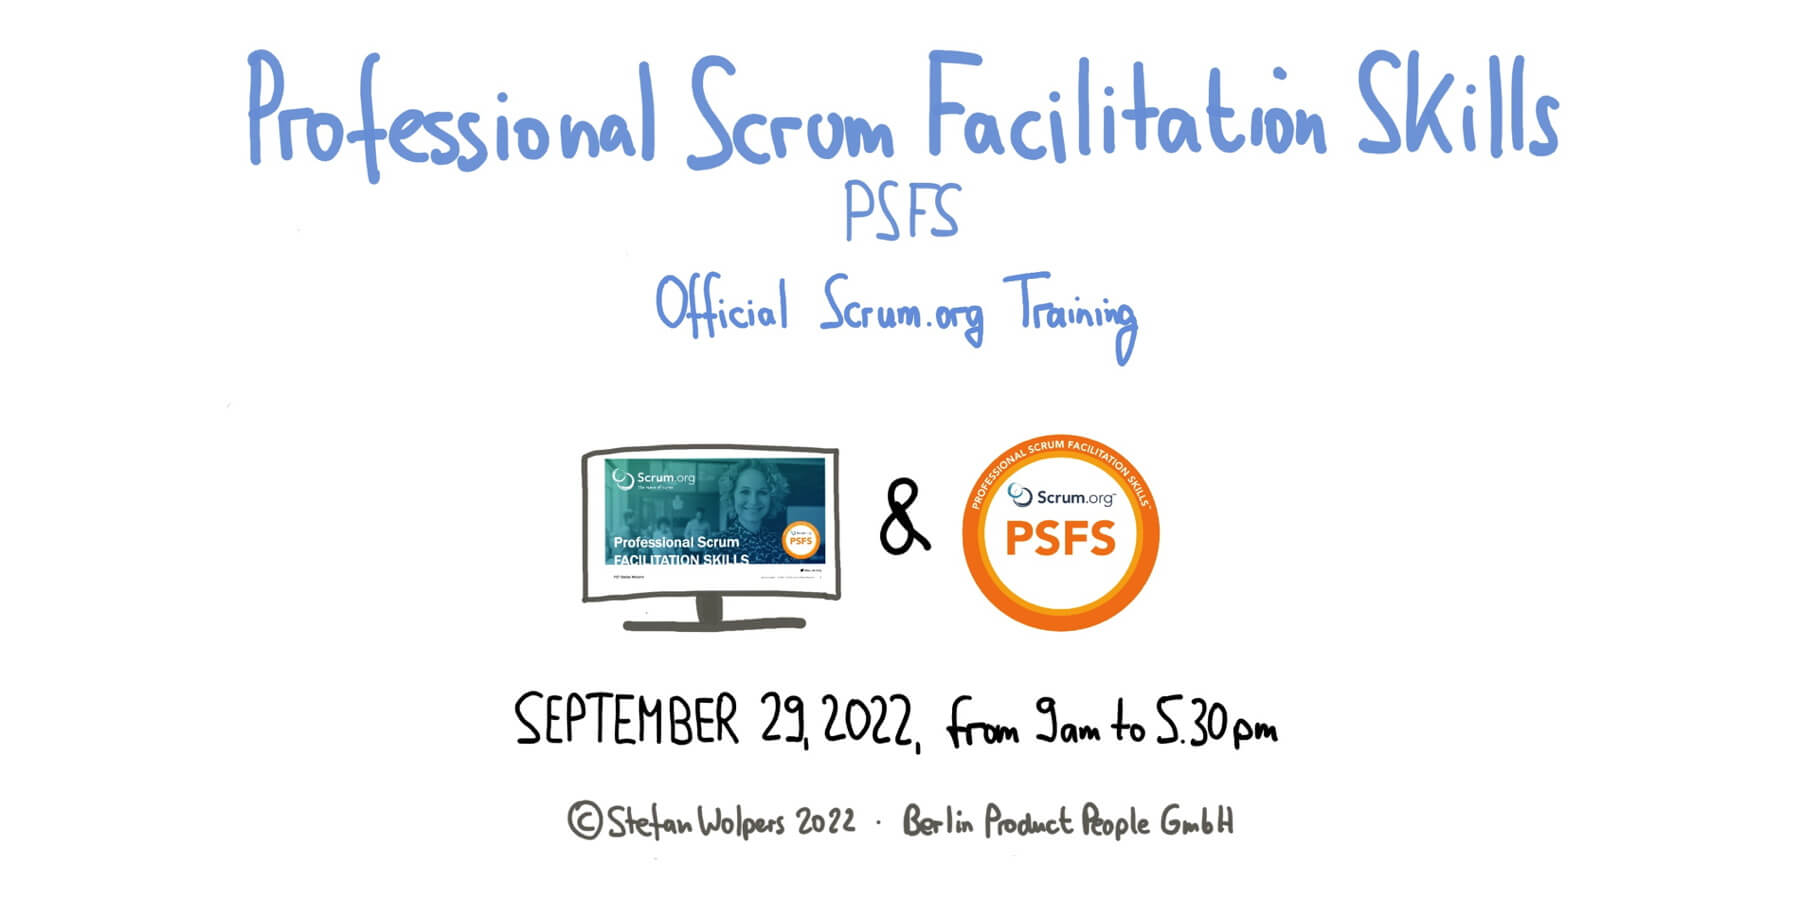 Professional Scrum Facilitation Skills Schulung (PSFS) — September 29, 2022 — Berlin Product People GmbH